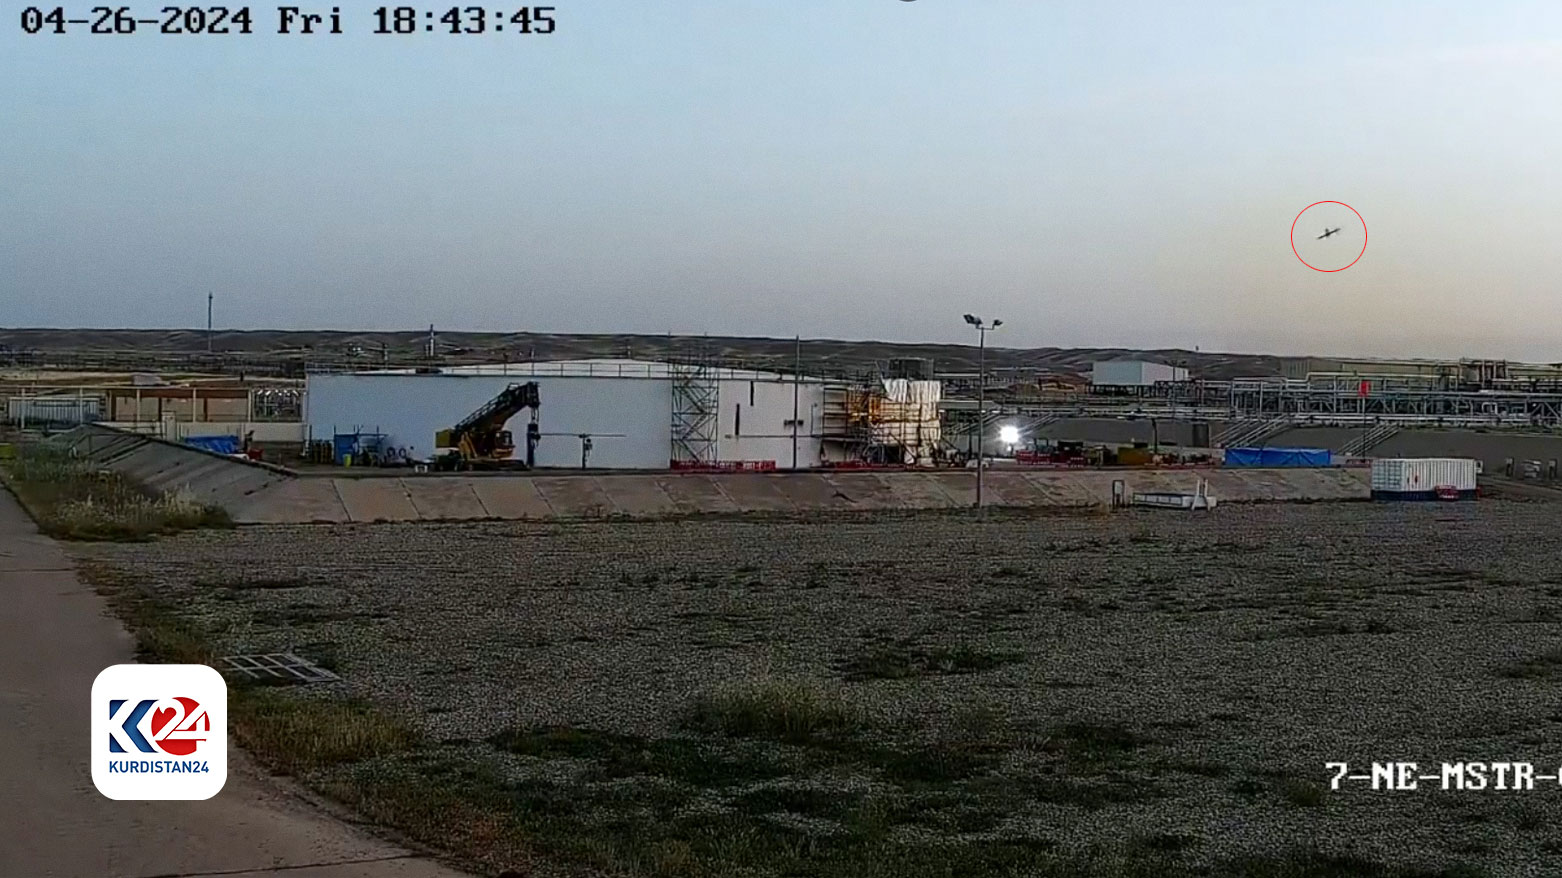 Exclusive Surveillance footage reveals dramatic drone attack on Khor Mor gas field